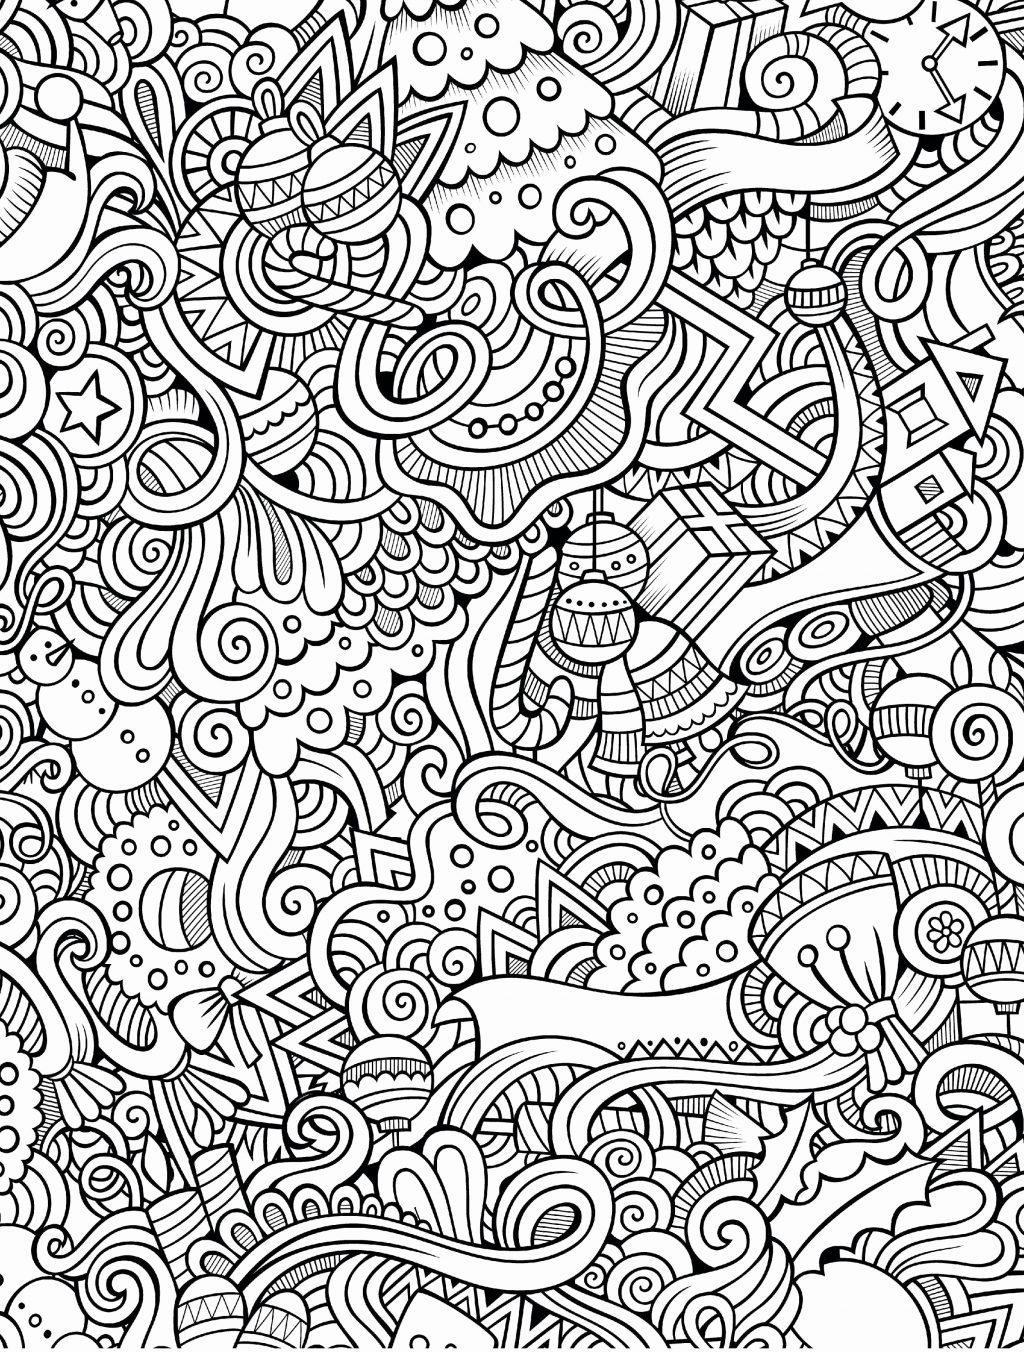 Beautiful Nature Coloring Pages Coloring Page Incredible Small Coloring Books For Adults Picture